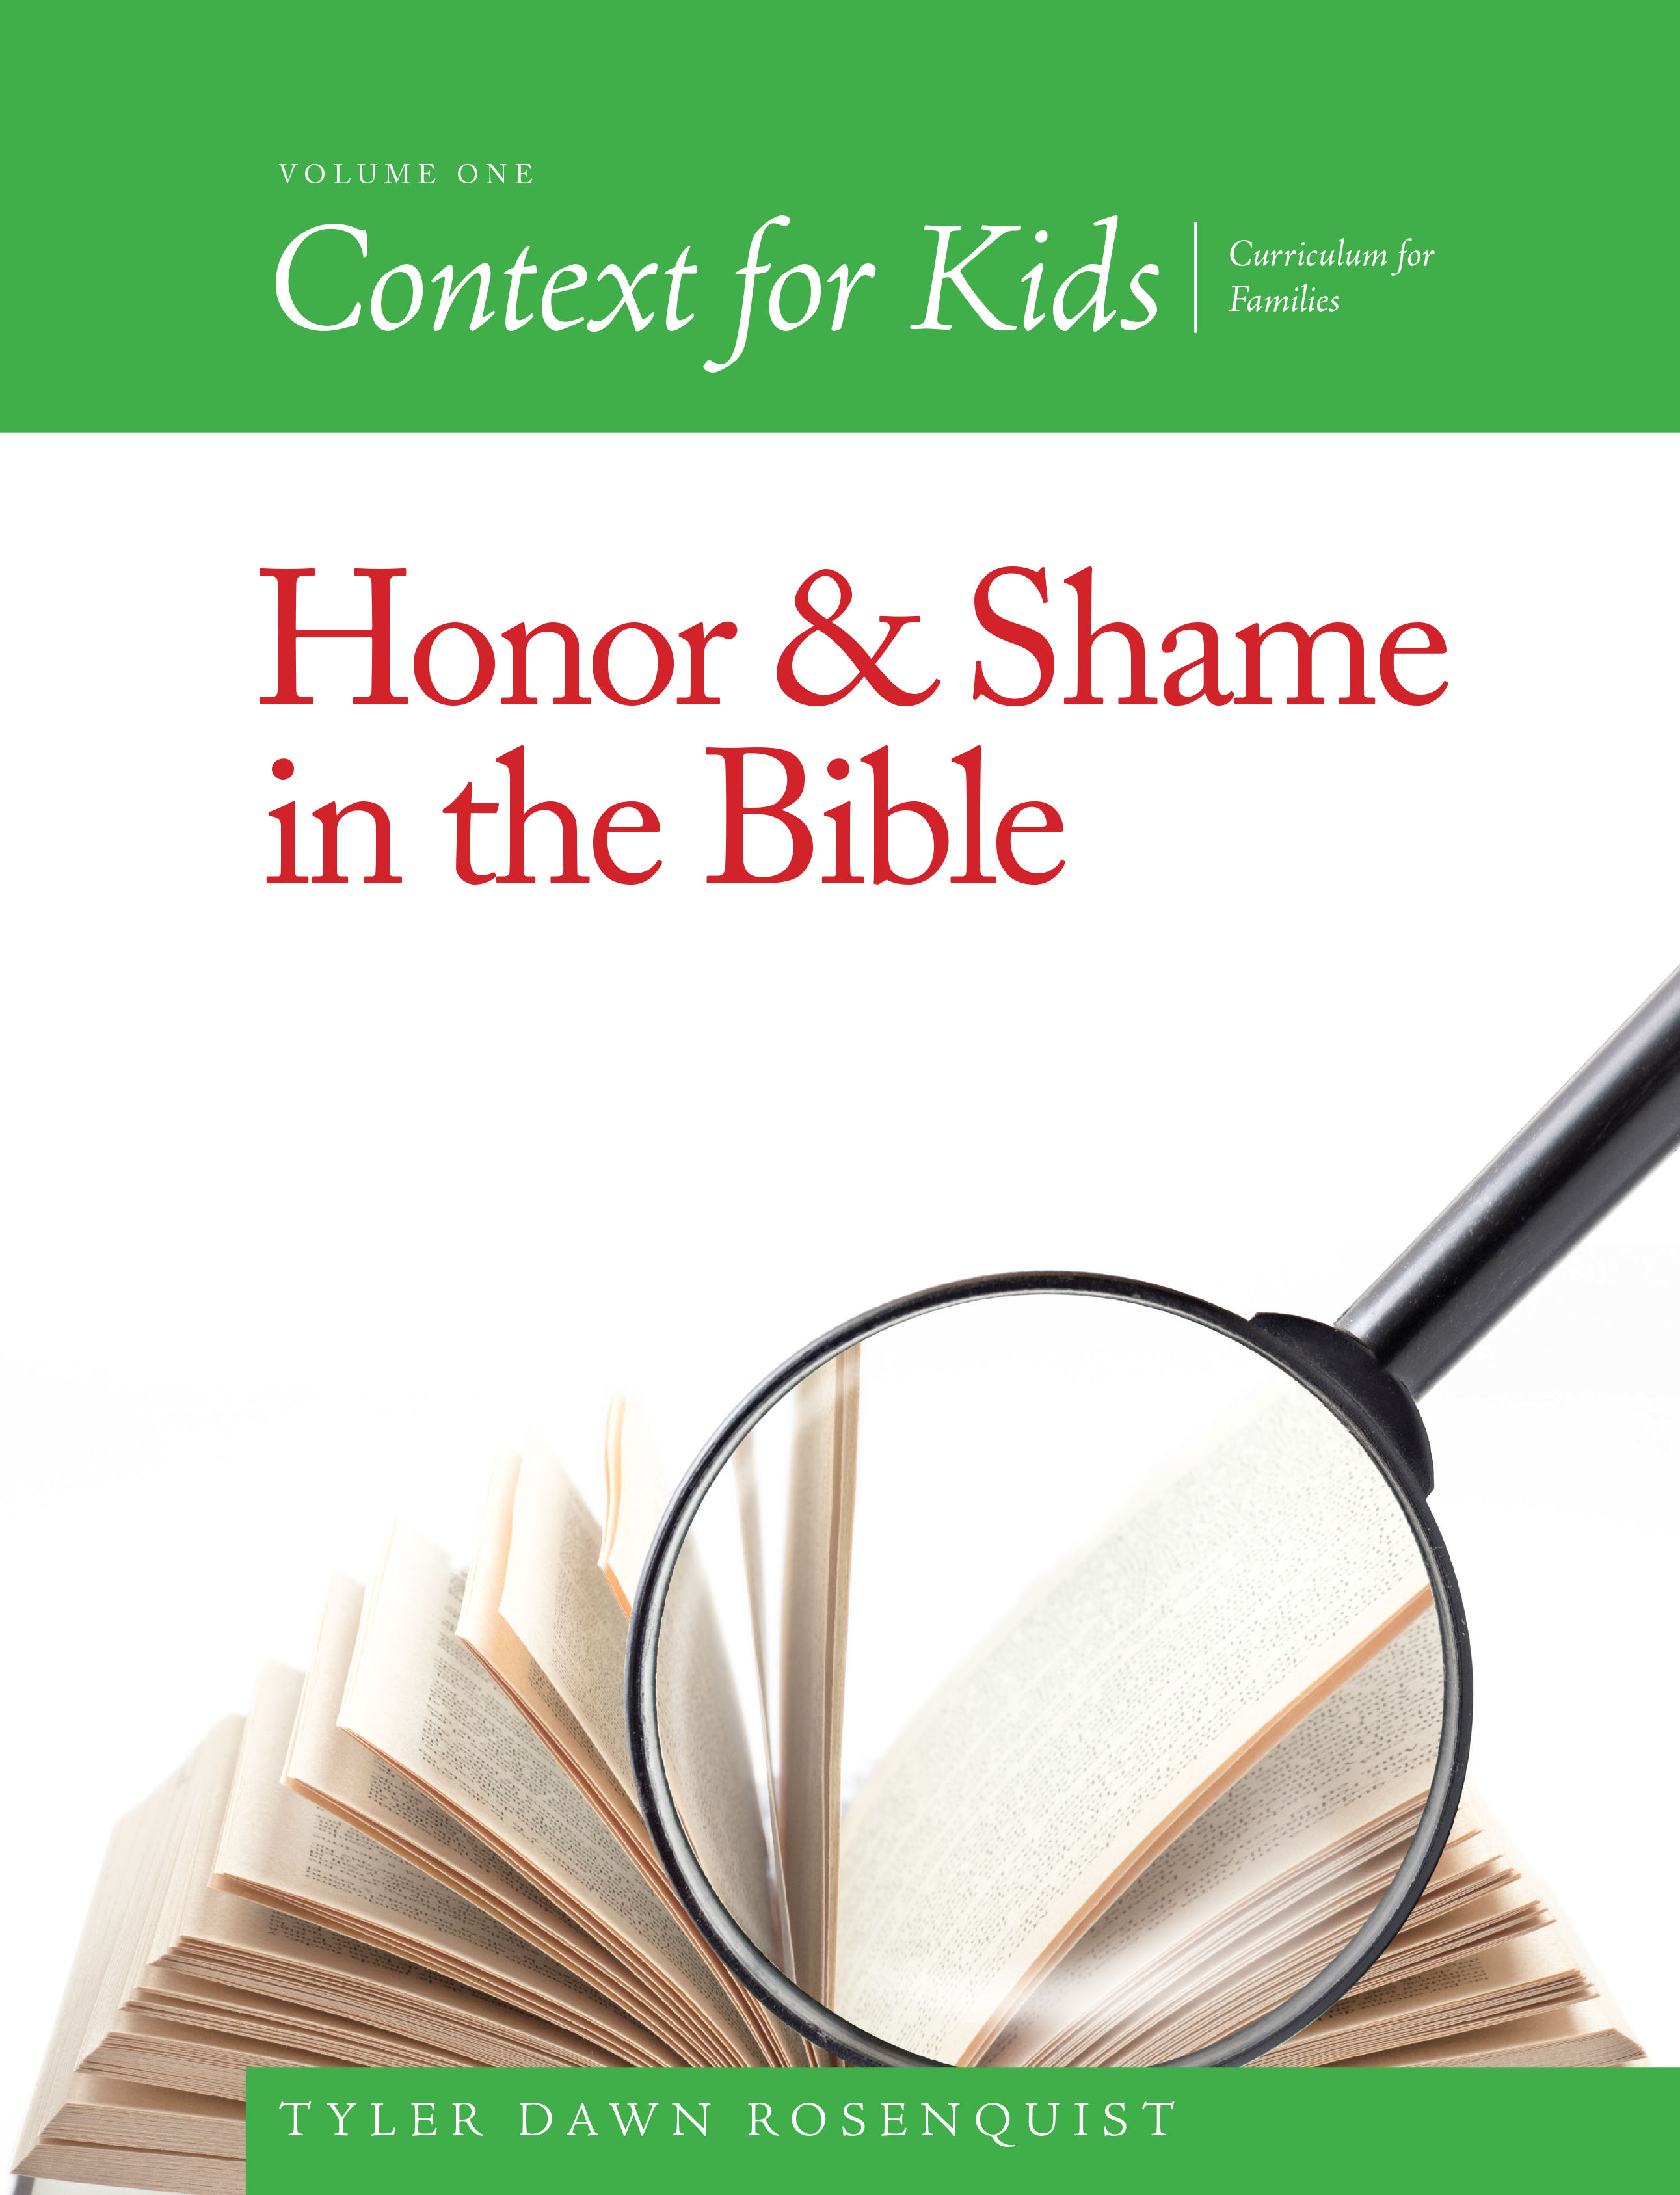 A New Type of Curriculum for the Entire Family: Honor and Shame in the Bible PLUS Lessons in Yeshua’s Torah